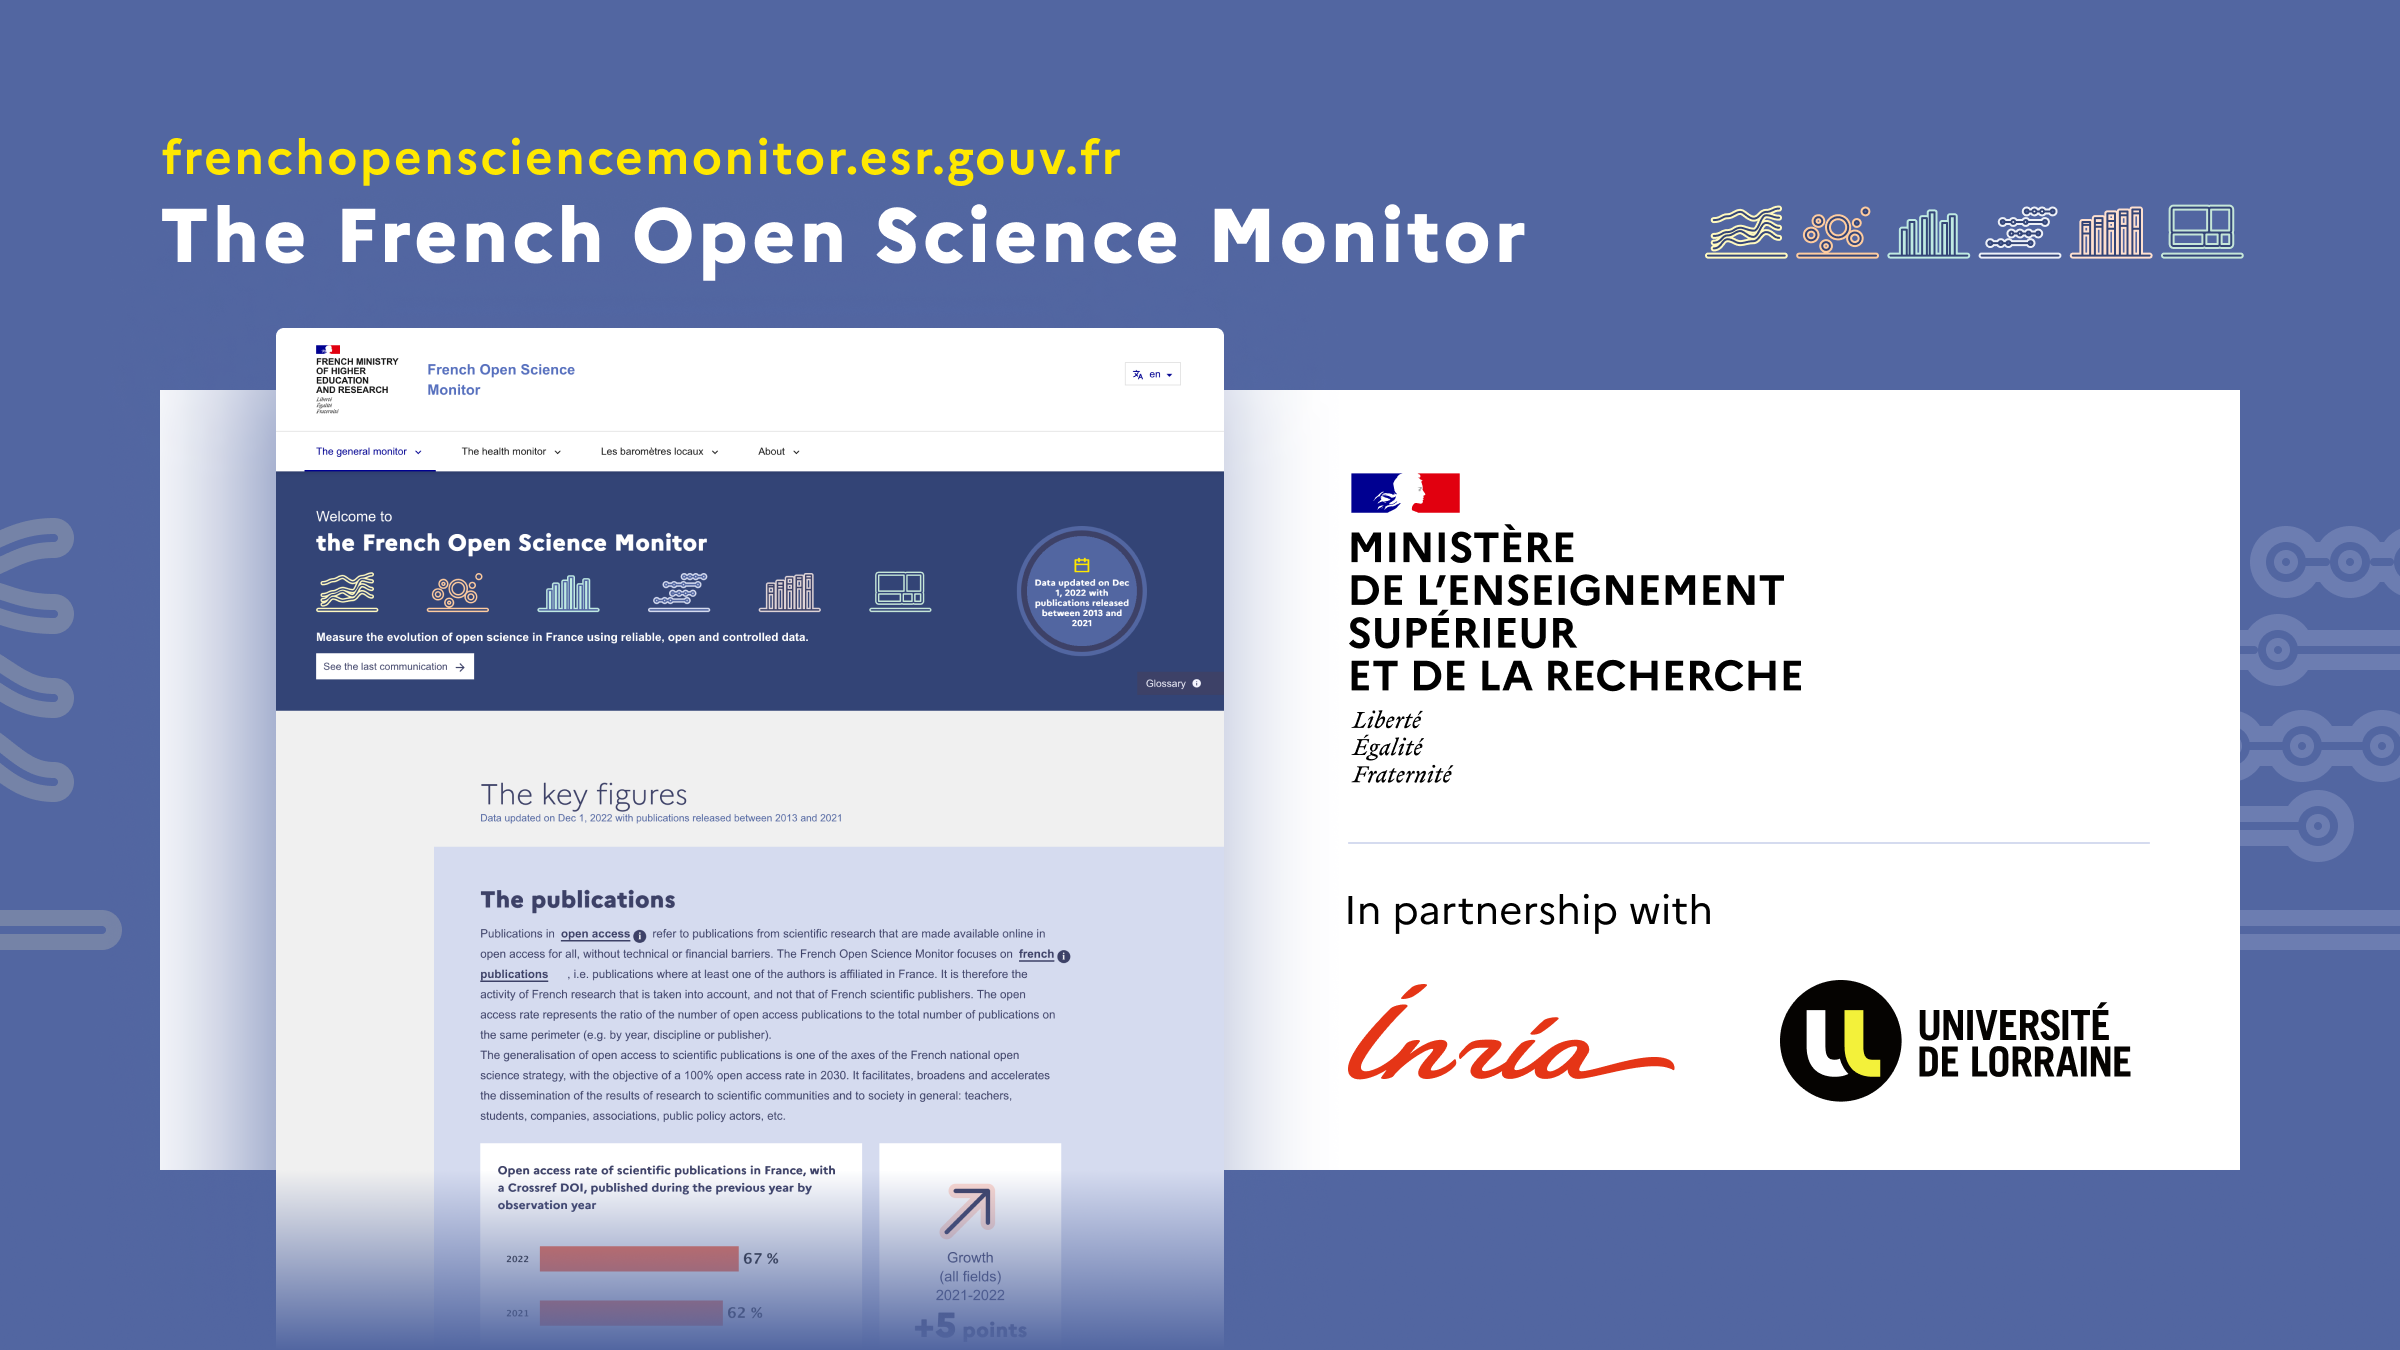 illustration The French Open Science Monitor 2022: 67% of publications in open access and new indicators for research data and codes and software